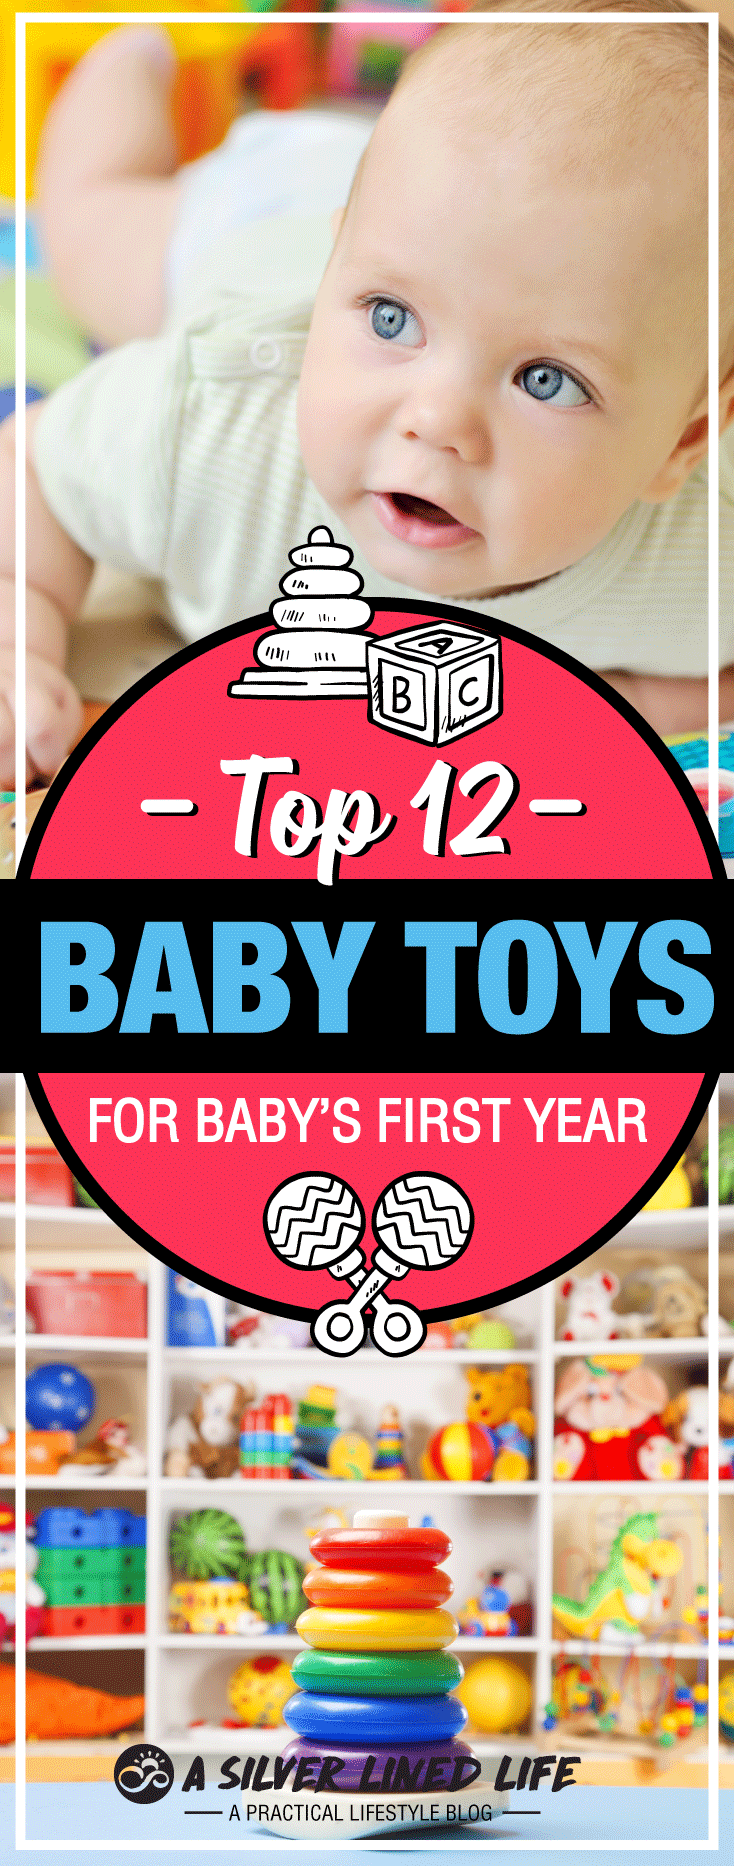 Best baby toys by age: newborn - 1 year. Great gift and registry ideas for education and early development!